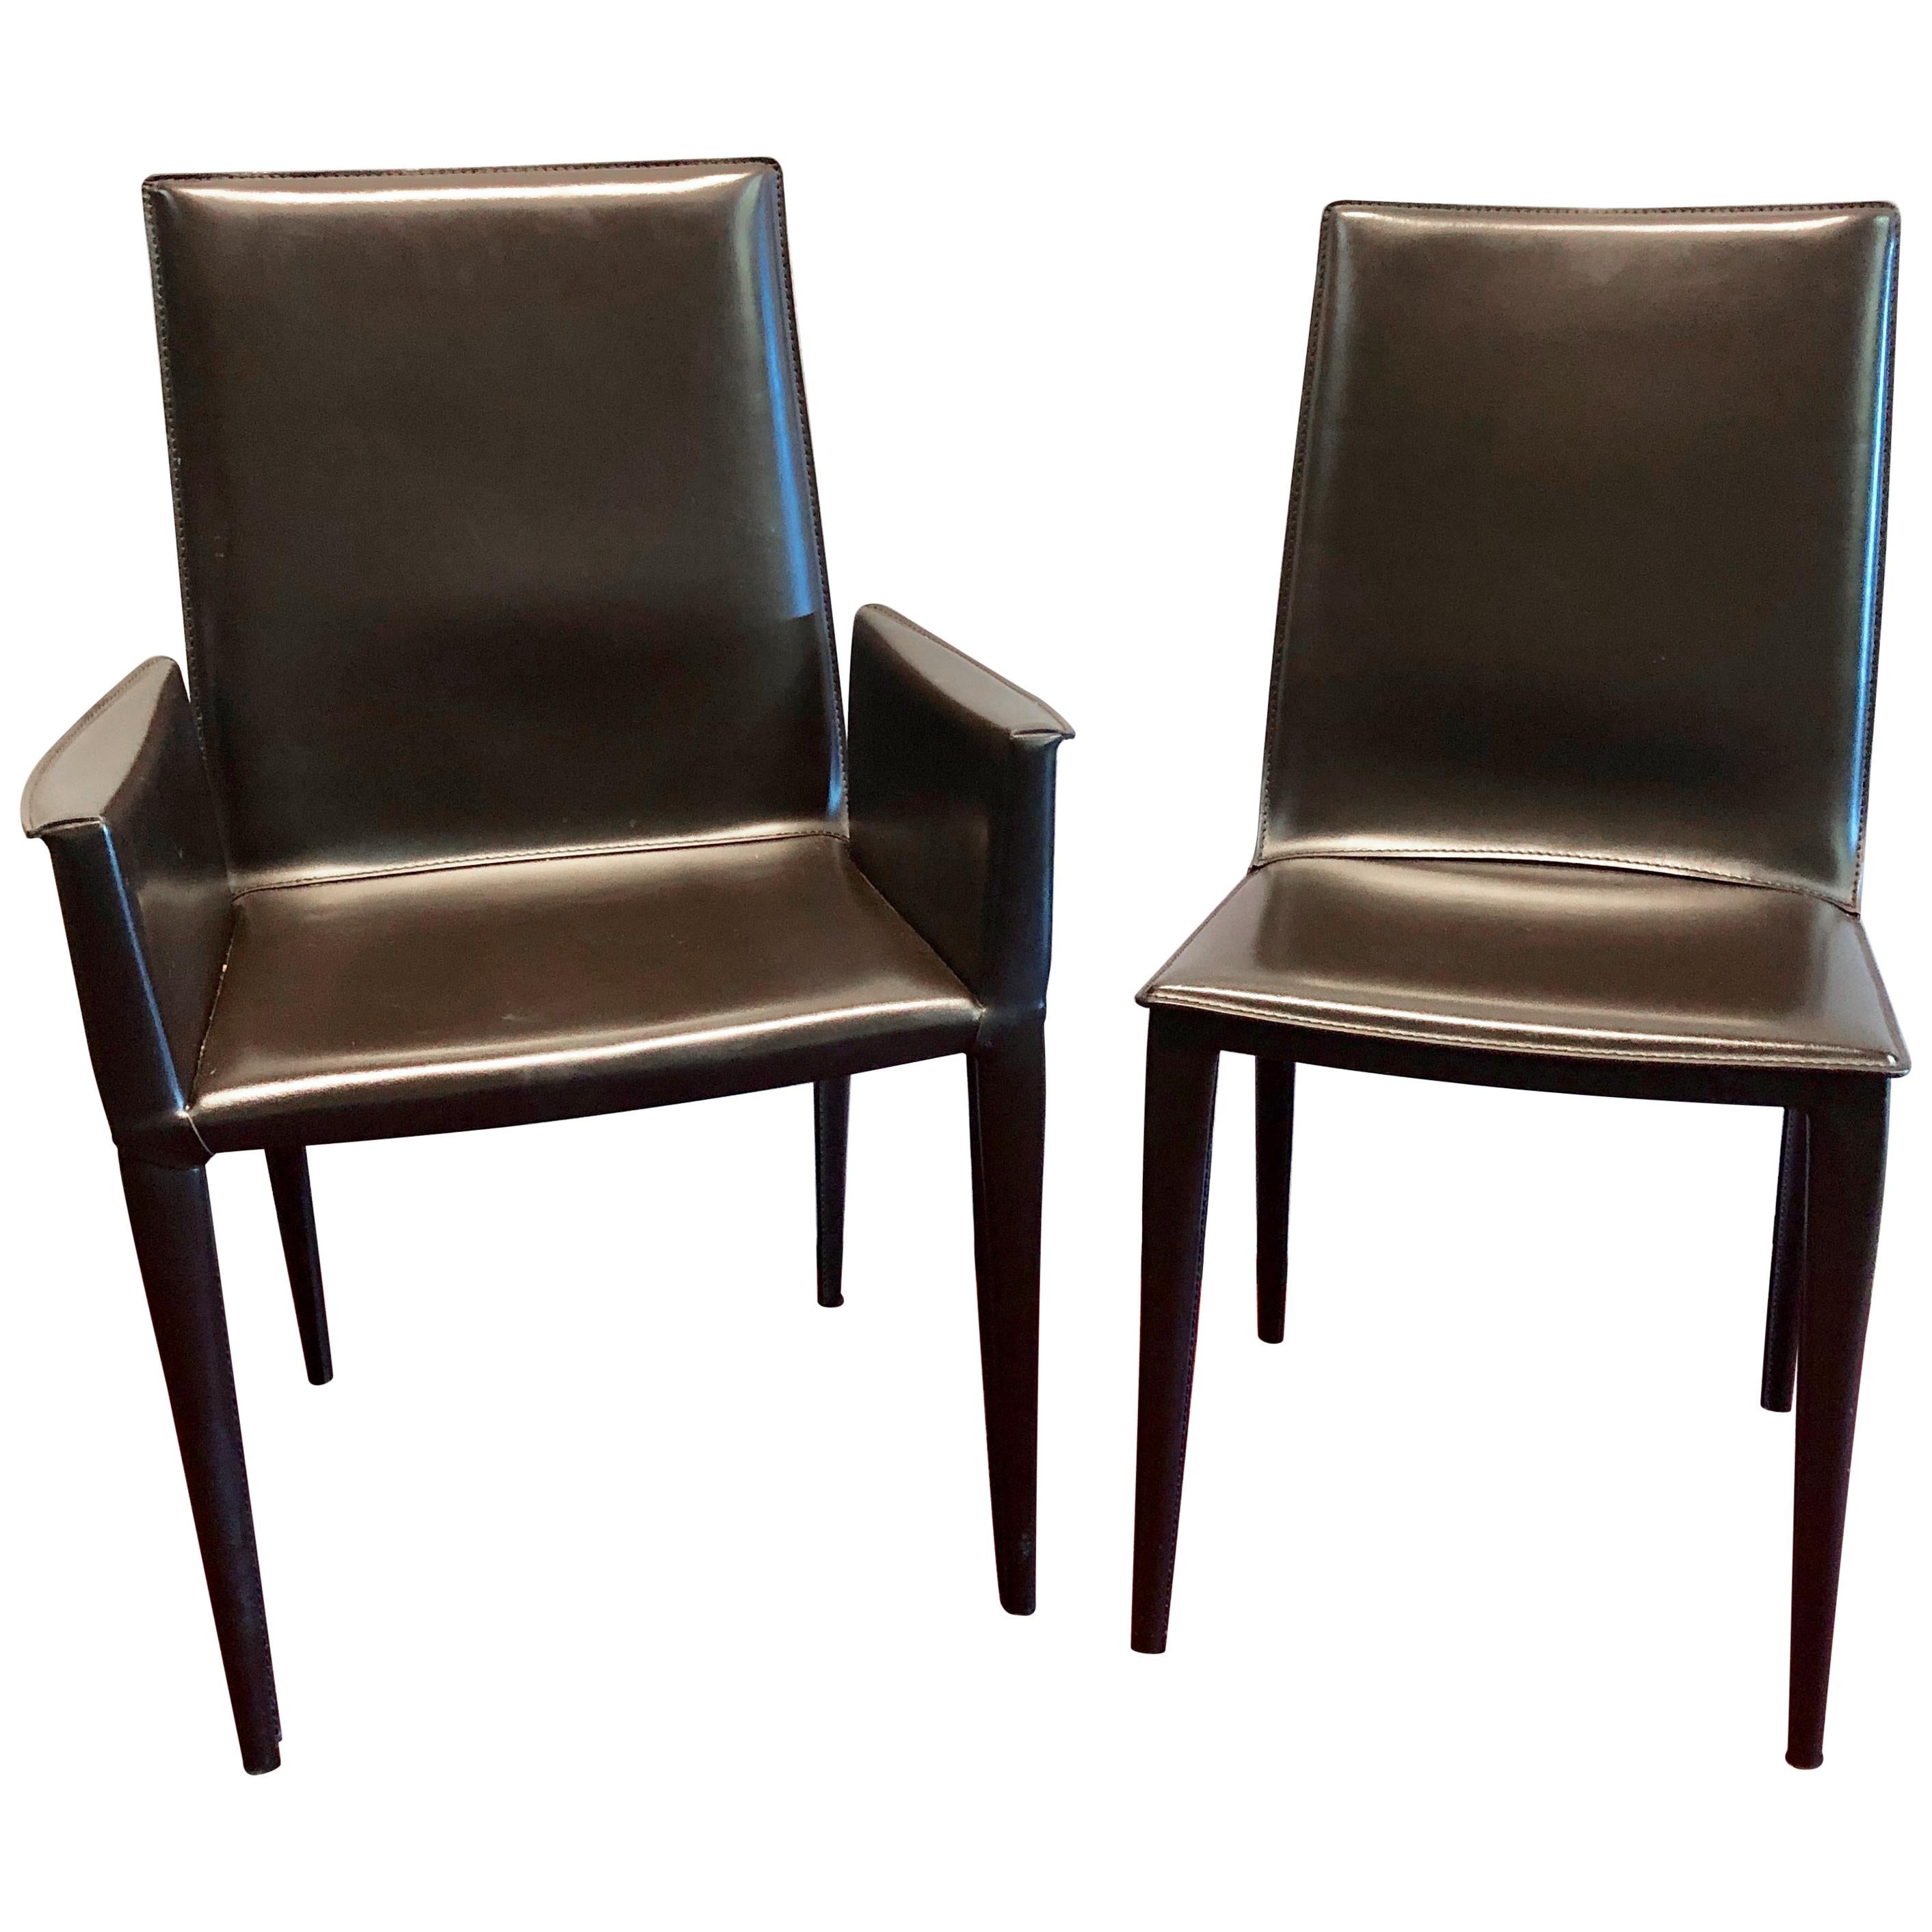 Ten Frag Italian Leather Dining Chairs Marchio Collection by Design Within Reach